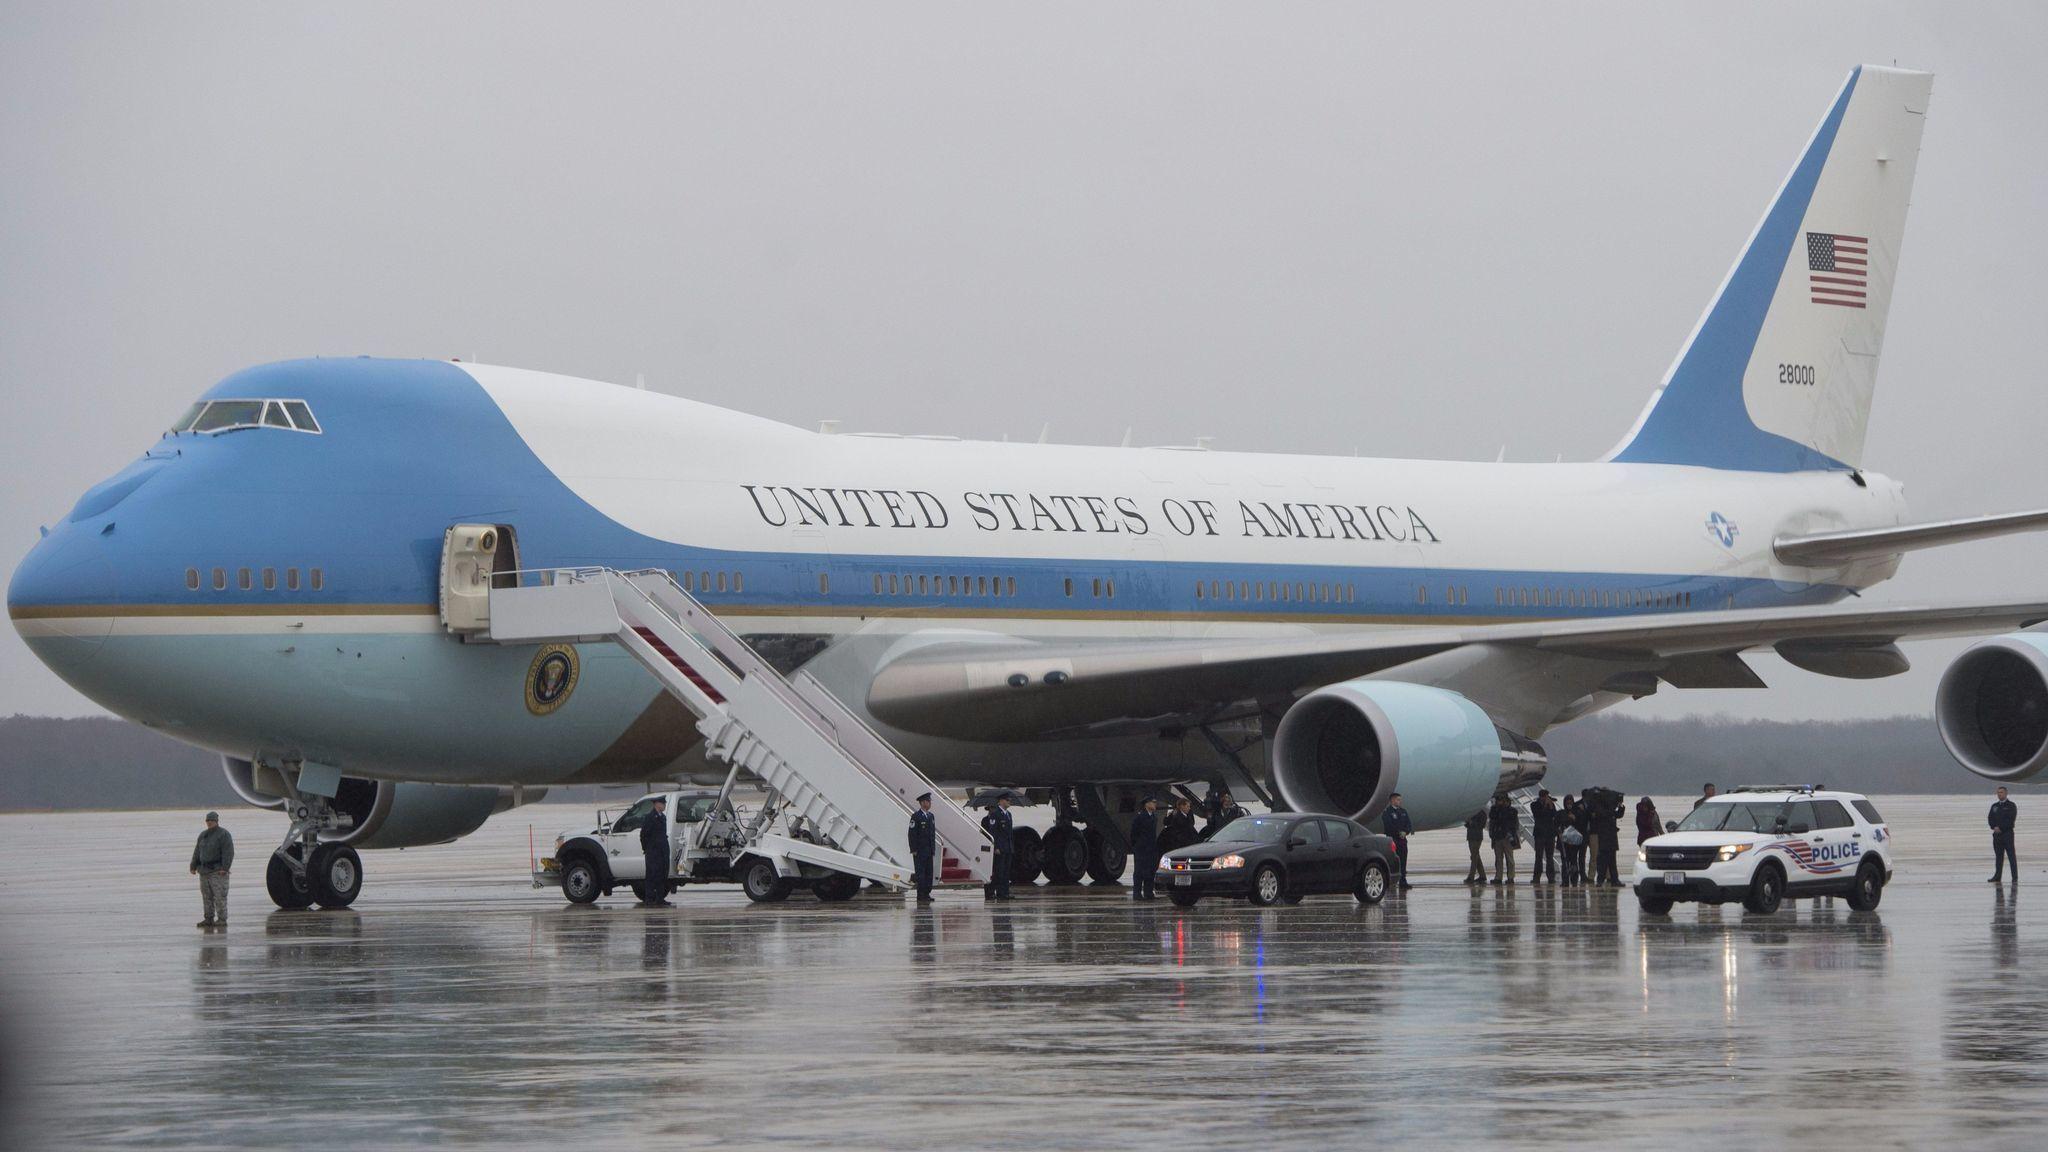 Boeing Wins Nearly $600 Million Contract For Air Force One